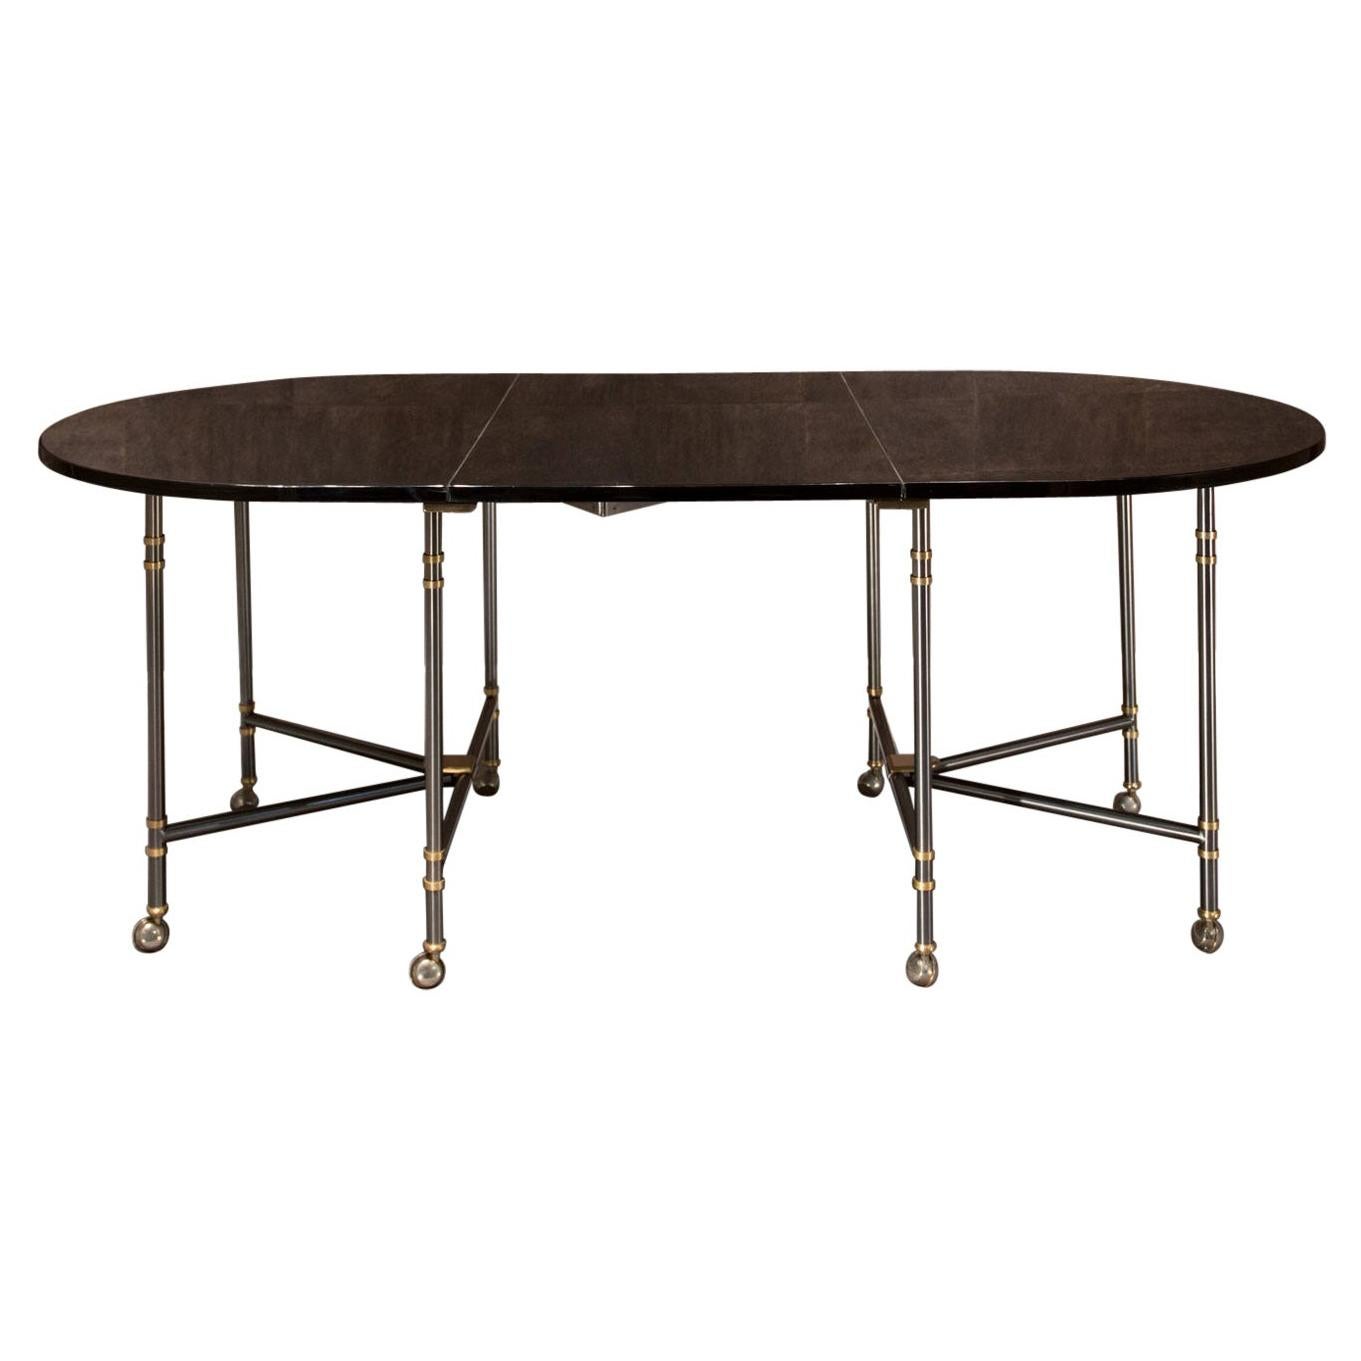 Maison Jansen Oval Black Lacquered France Dining Table Royal Model